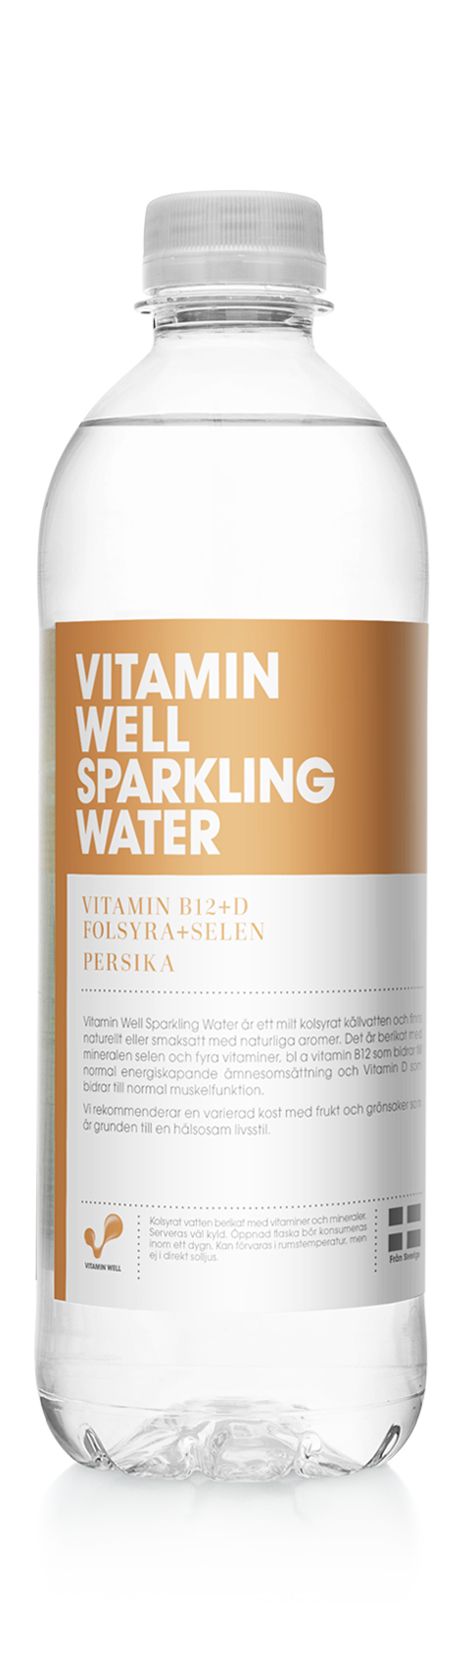 Vitamin Well Sparkling Water Persika